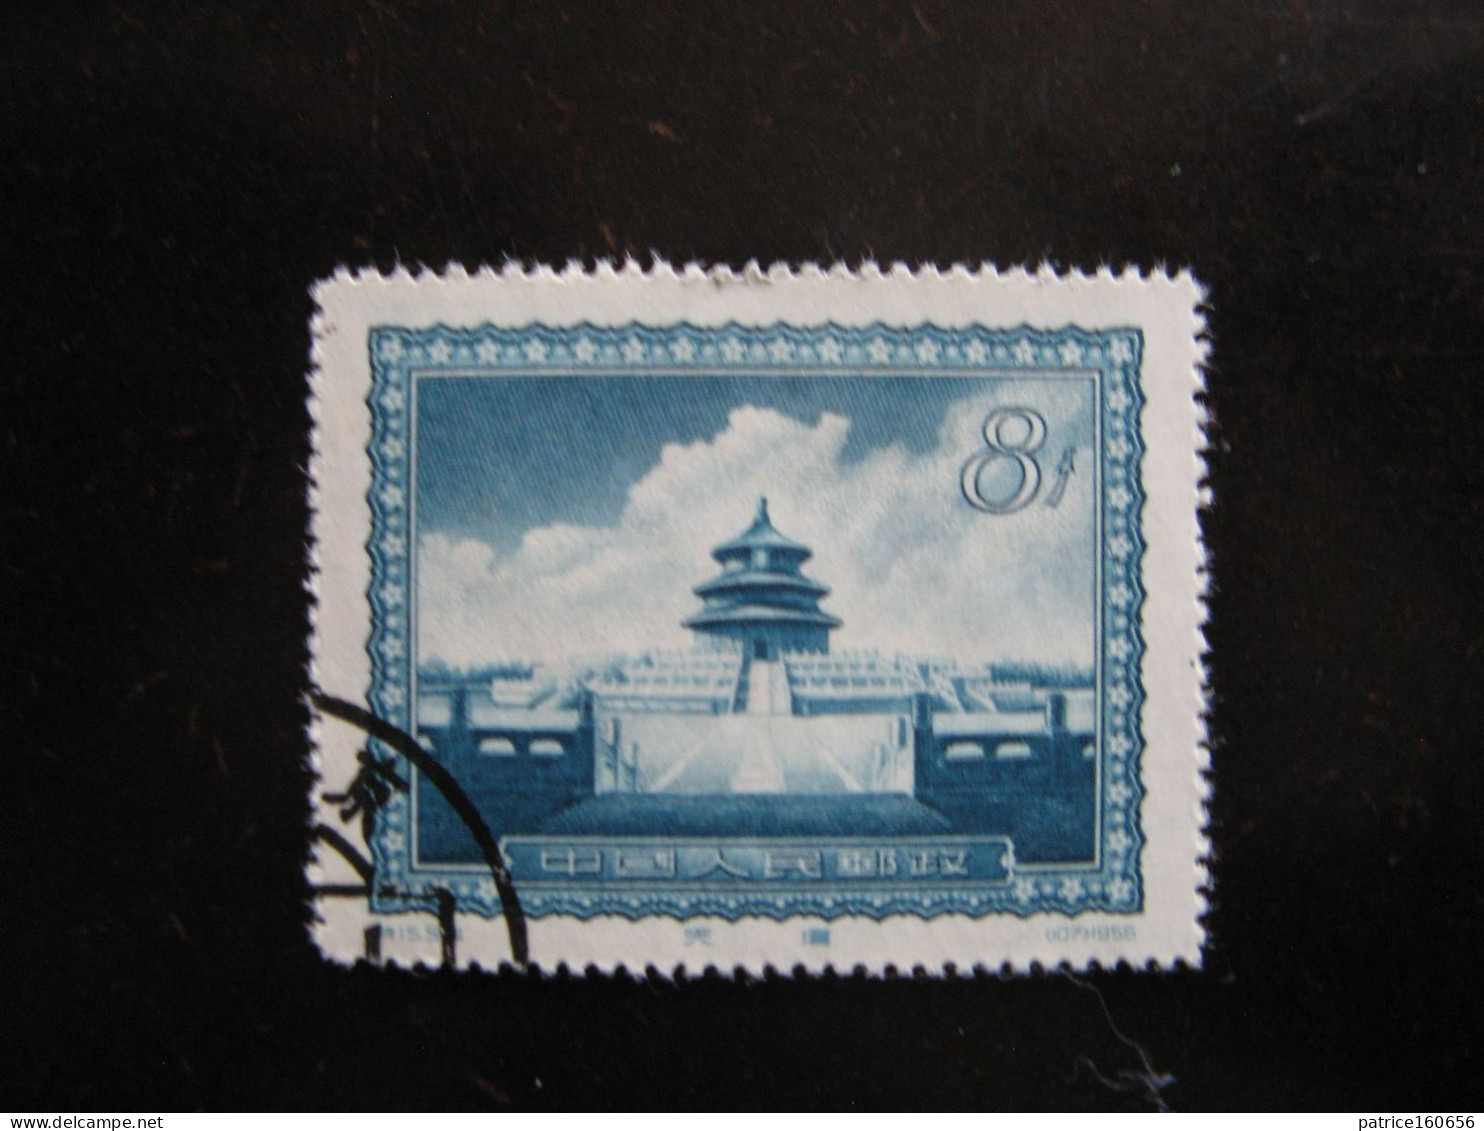 CHINE :  TB N° 1074 . Oblitéré - Used Stamps